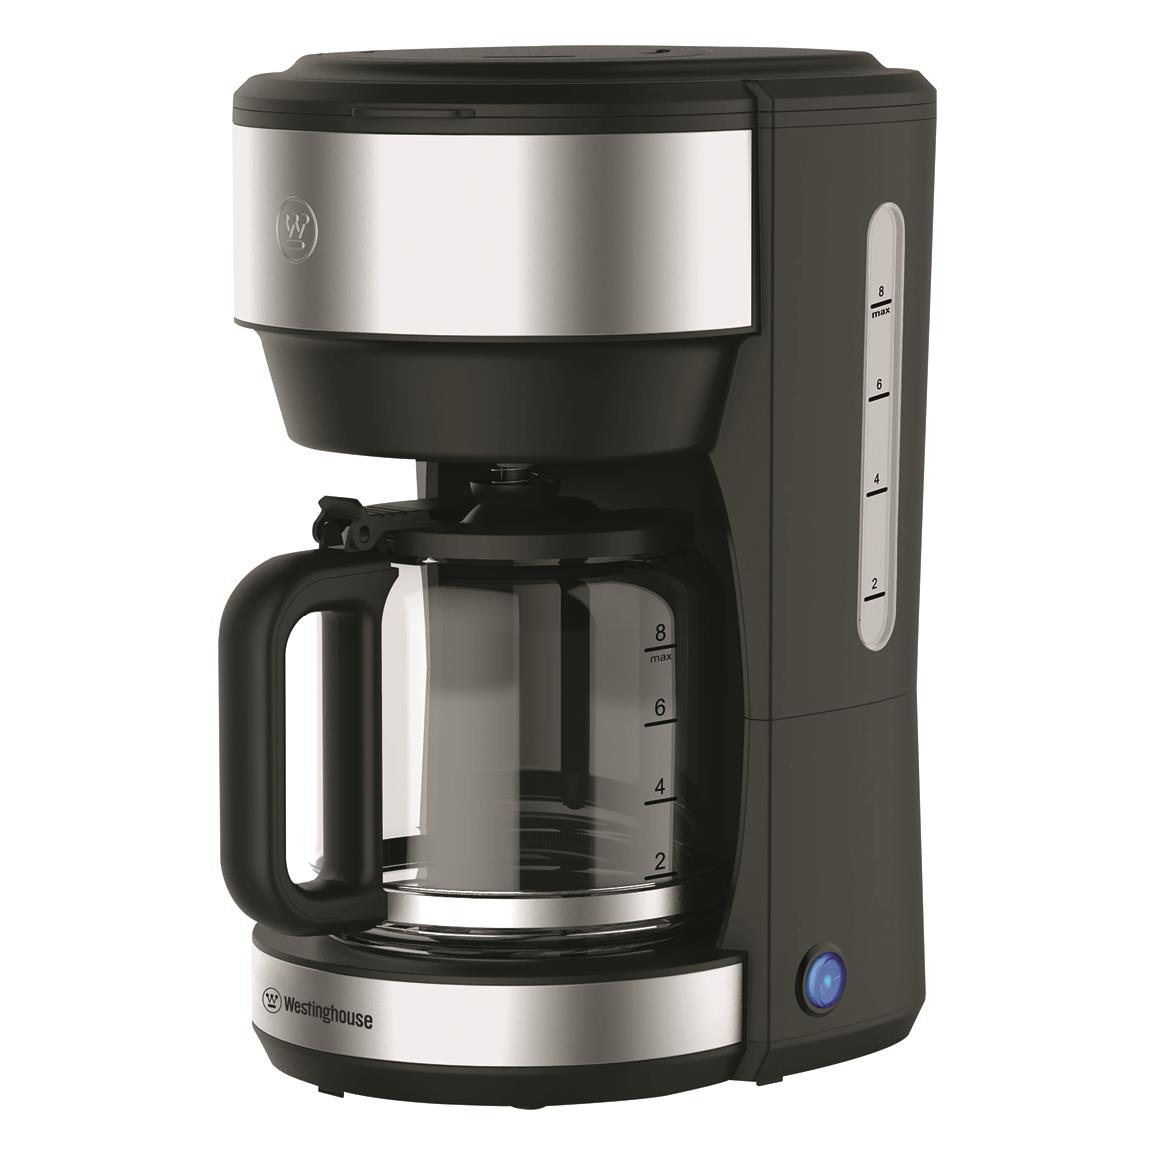 Westinghouse 1.75 L Coffee Maker, Stainless Steel